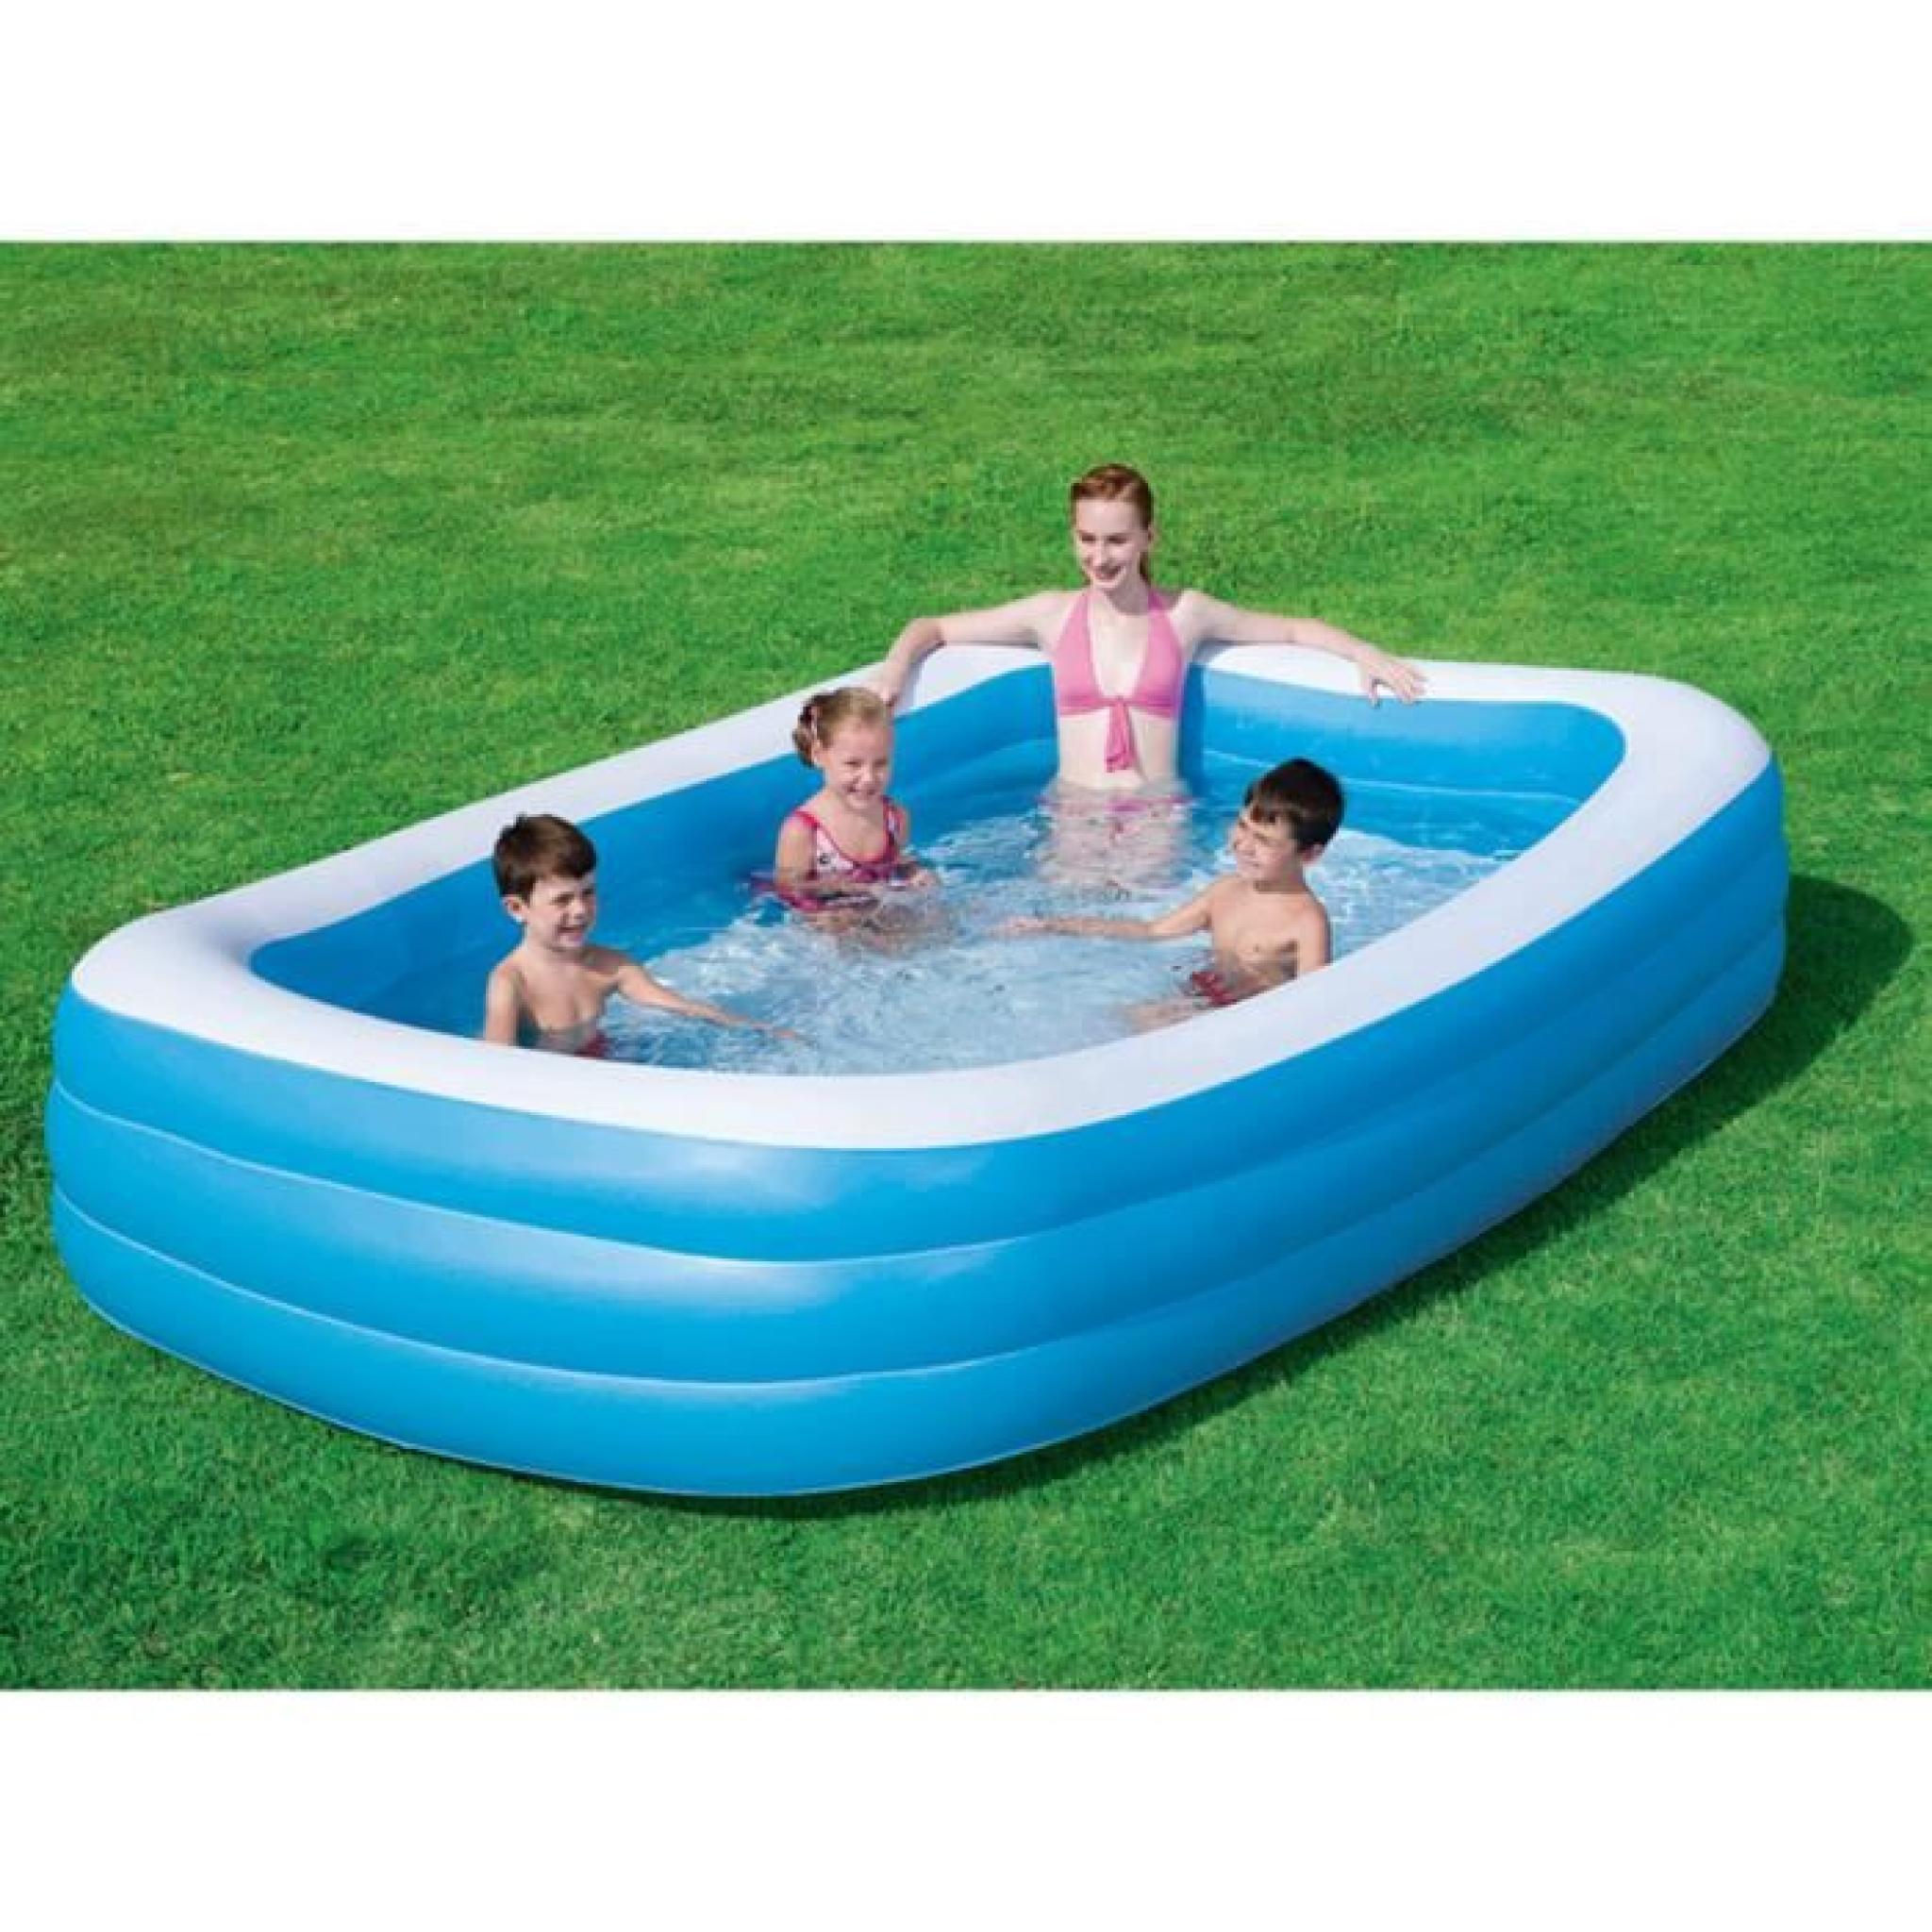 Piscine gonflable  Deluxe - 3.05 x 1.83 x 0.56 m pas cher